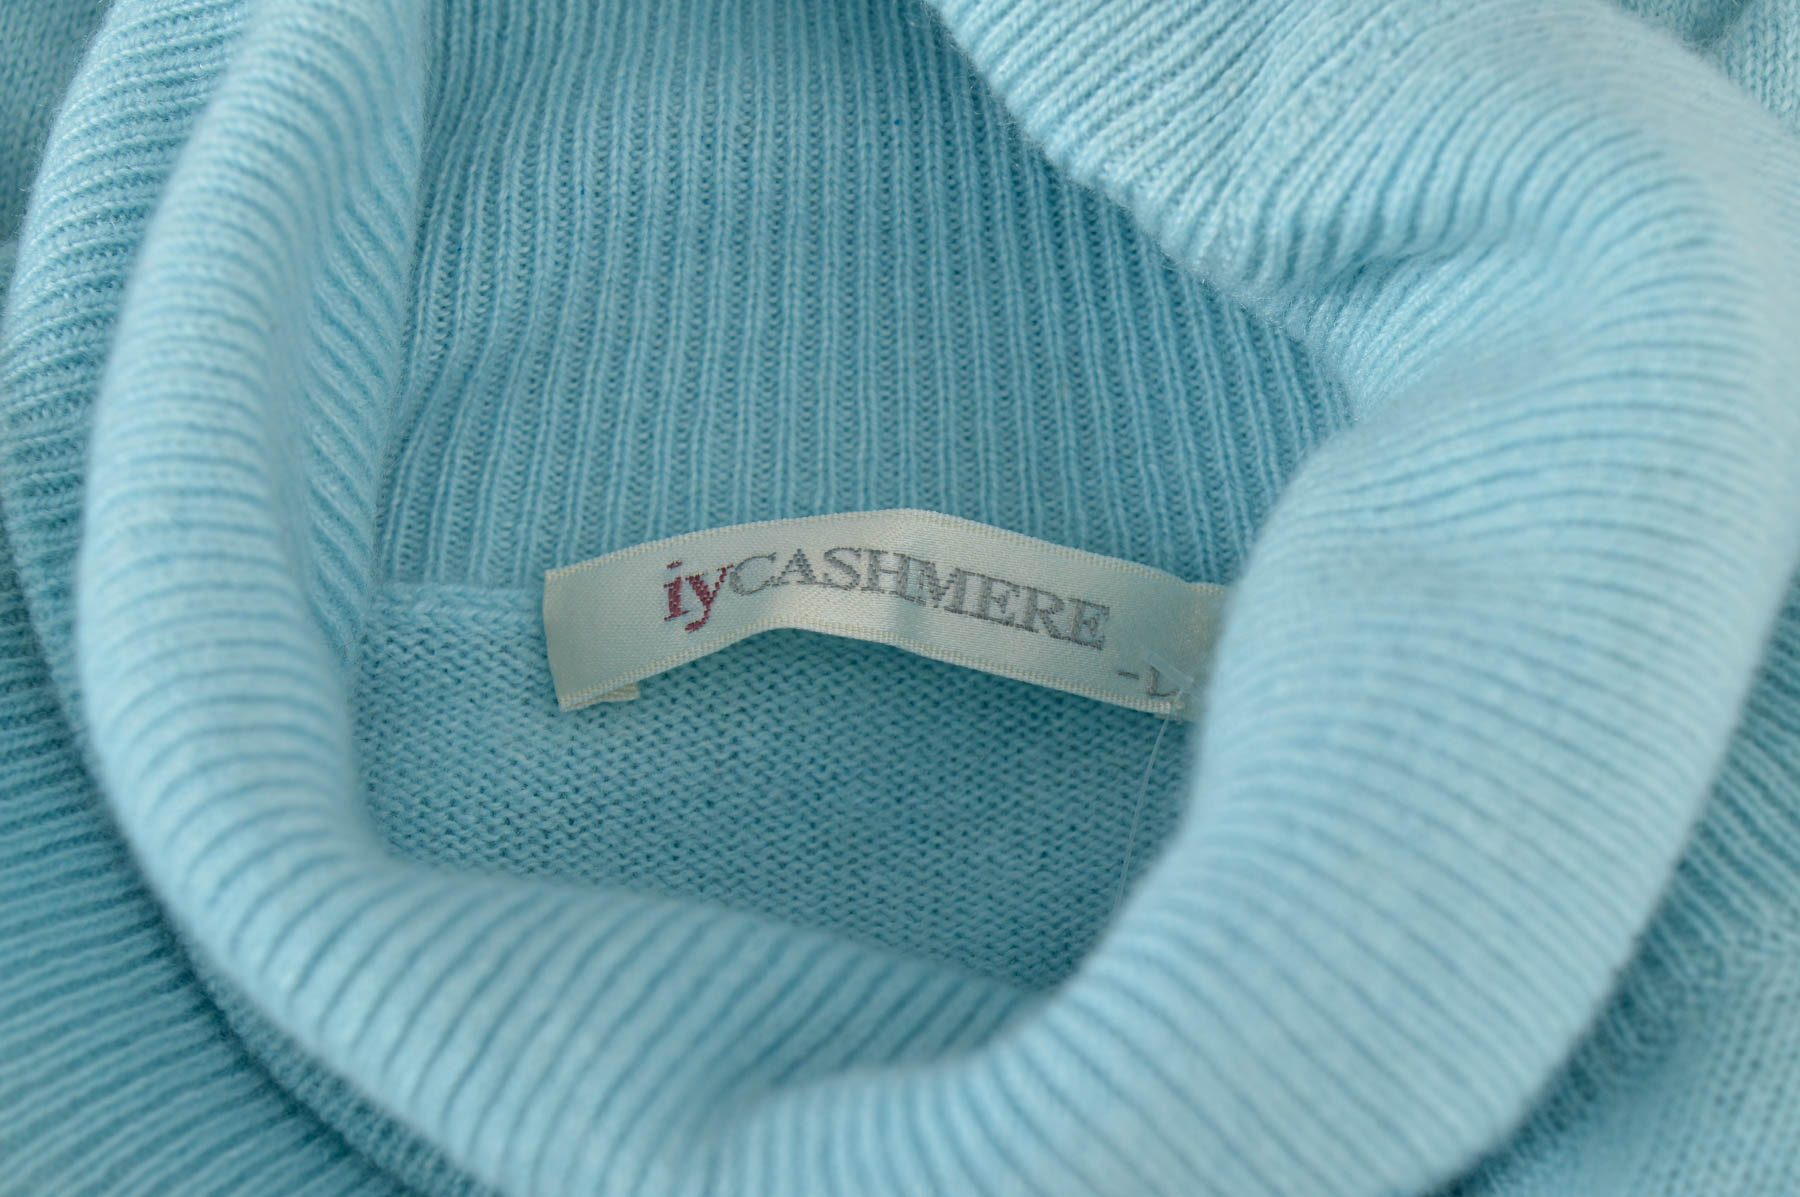 Women's sweater - Iy cashmere - 2